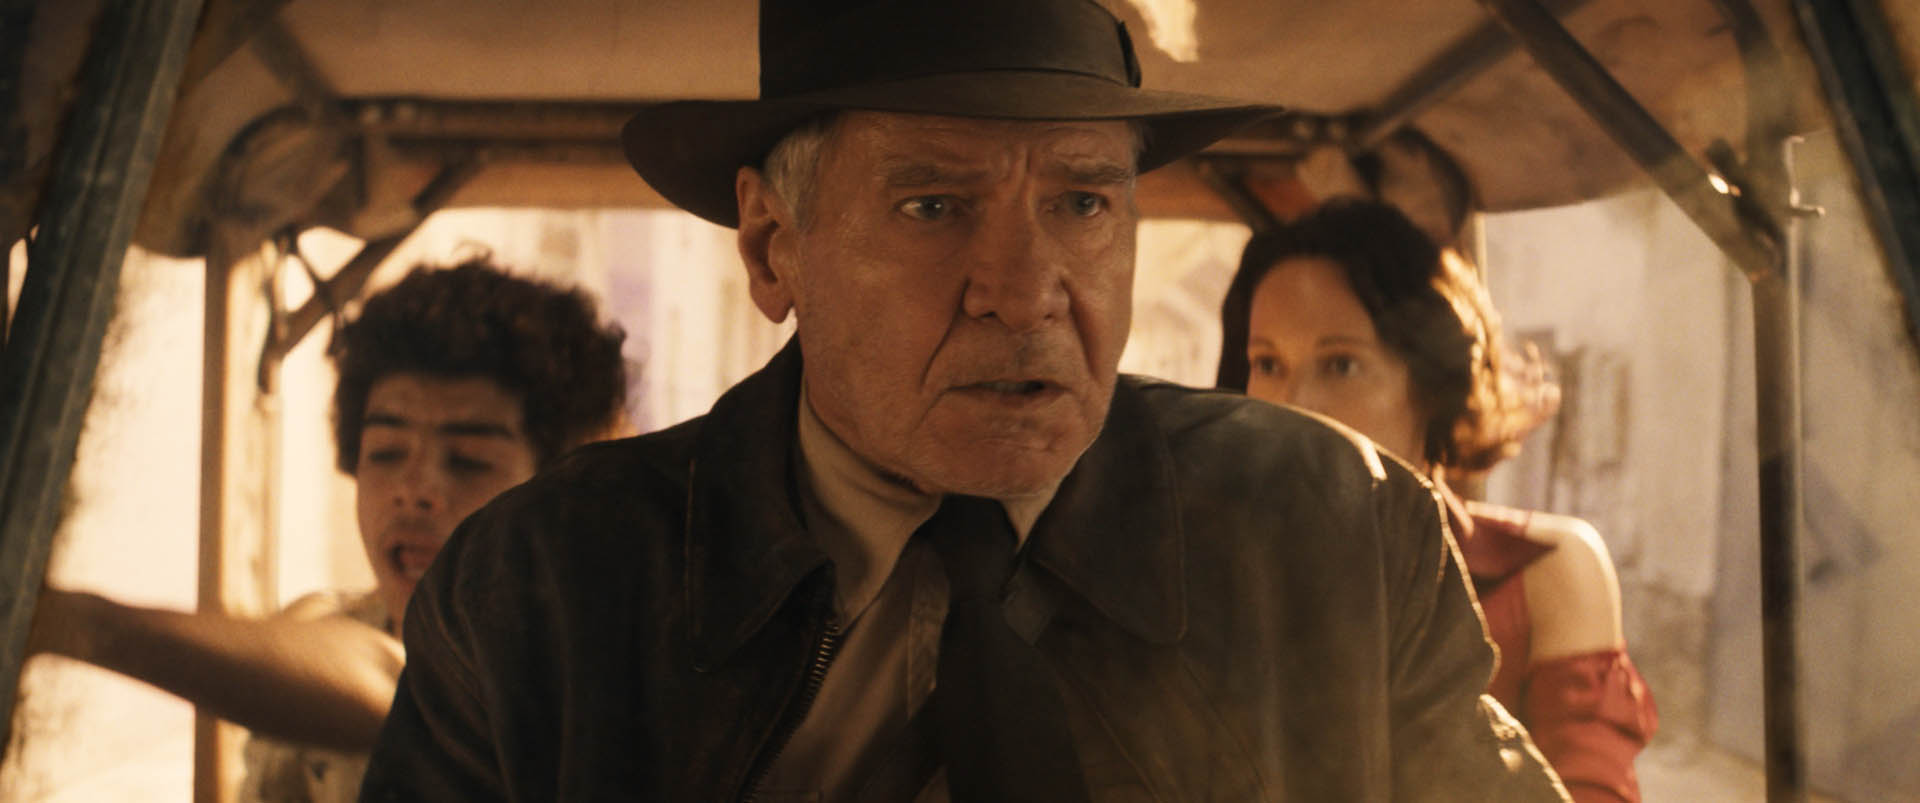 (L-R): Teddy (Ethann Isidore), Indiana Jones (Harrison Ford) and Helena (Phoebe Waller-Bridge) in Lucasfilm's INDIANA JONES AND THE DIAL OF DESTINY.